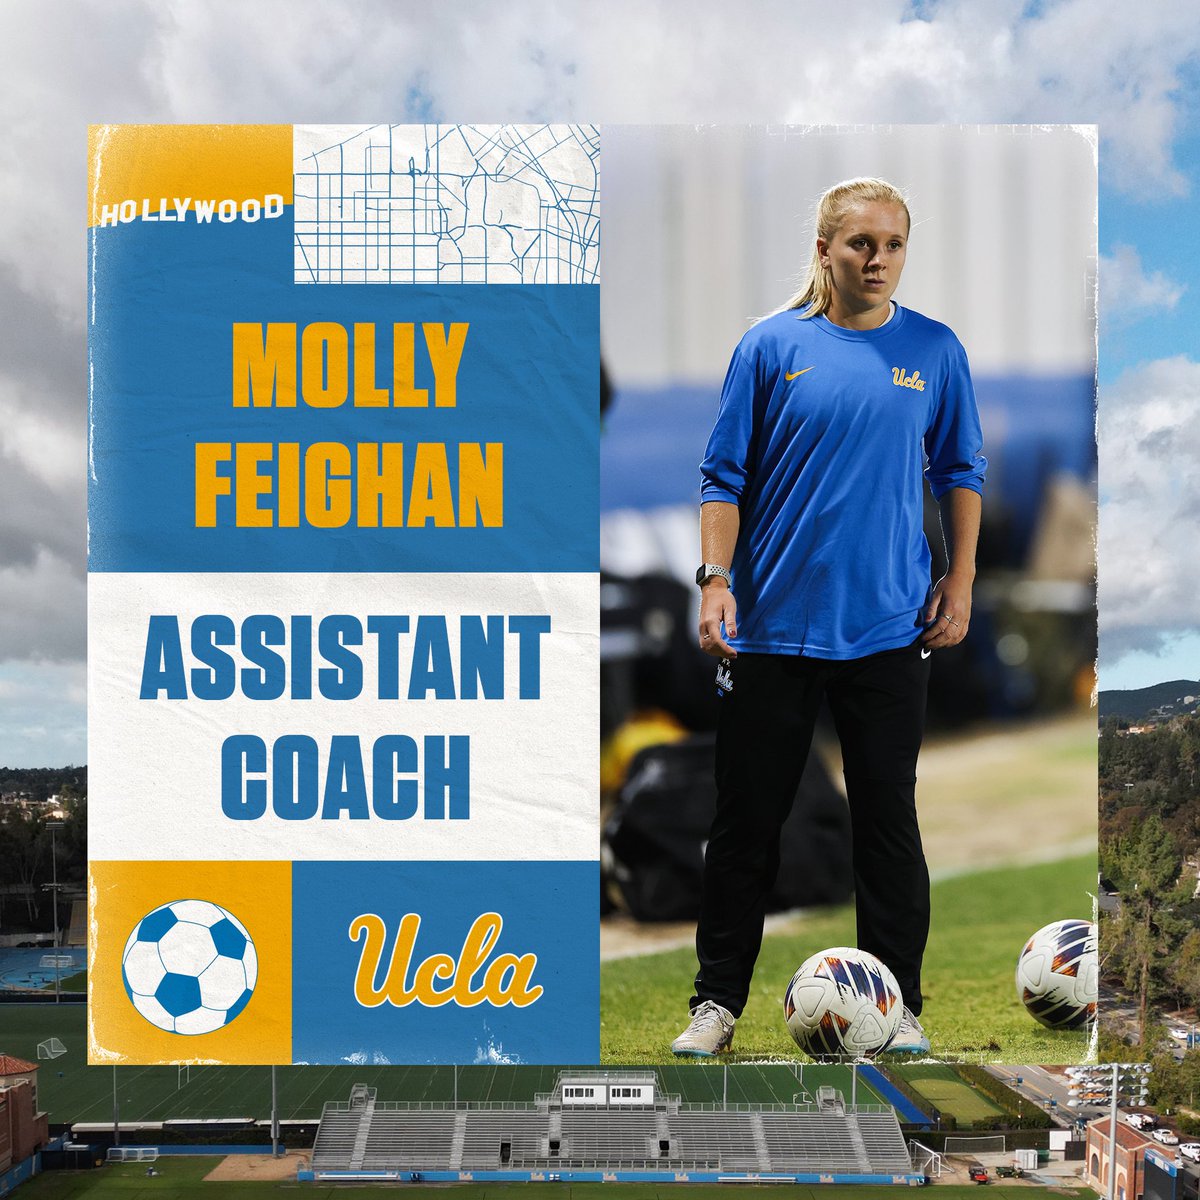 We’re excited to officially welcome Molly Feighan to our coaching staff! ℹ️: ucla.in/3vqpkbn